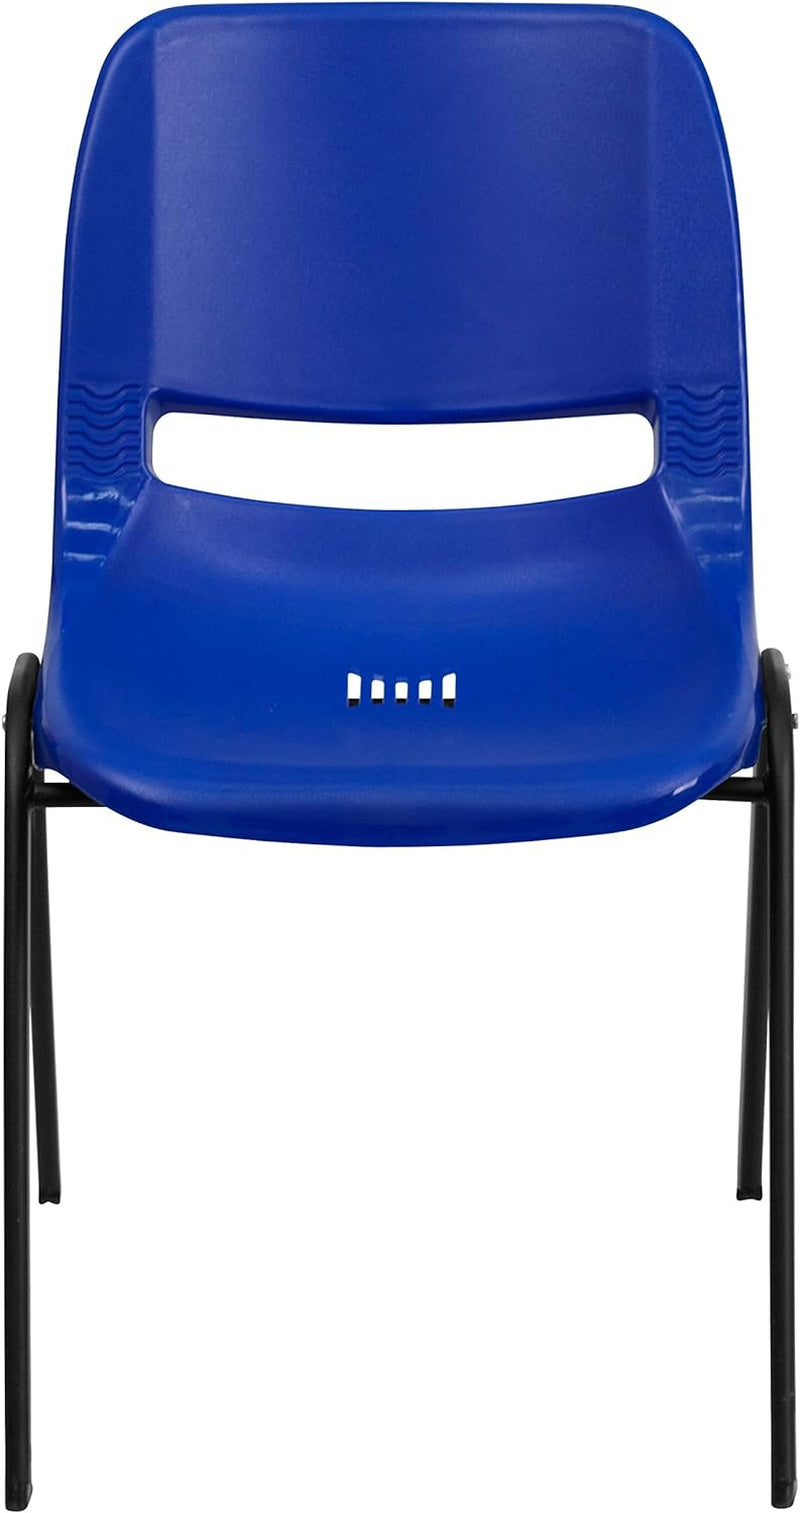 5 Pack HERCULES Series 440 Lb. Capacity Kid'S Navy Ergonomic Shell Stack Chair with Black Frame and 12" Seat Height